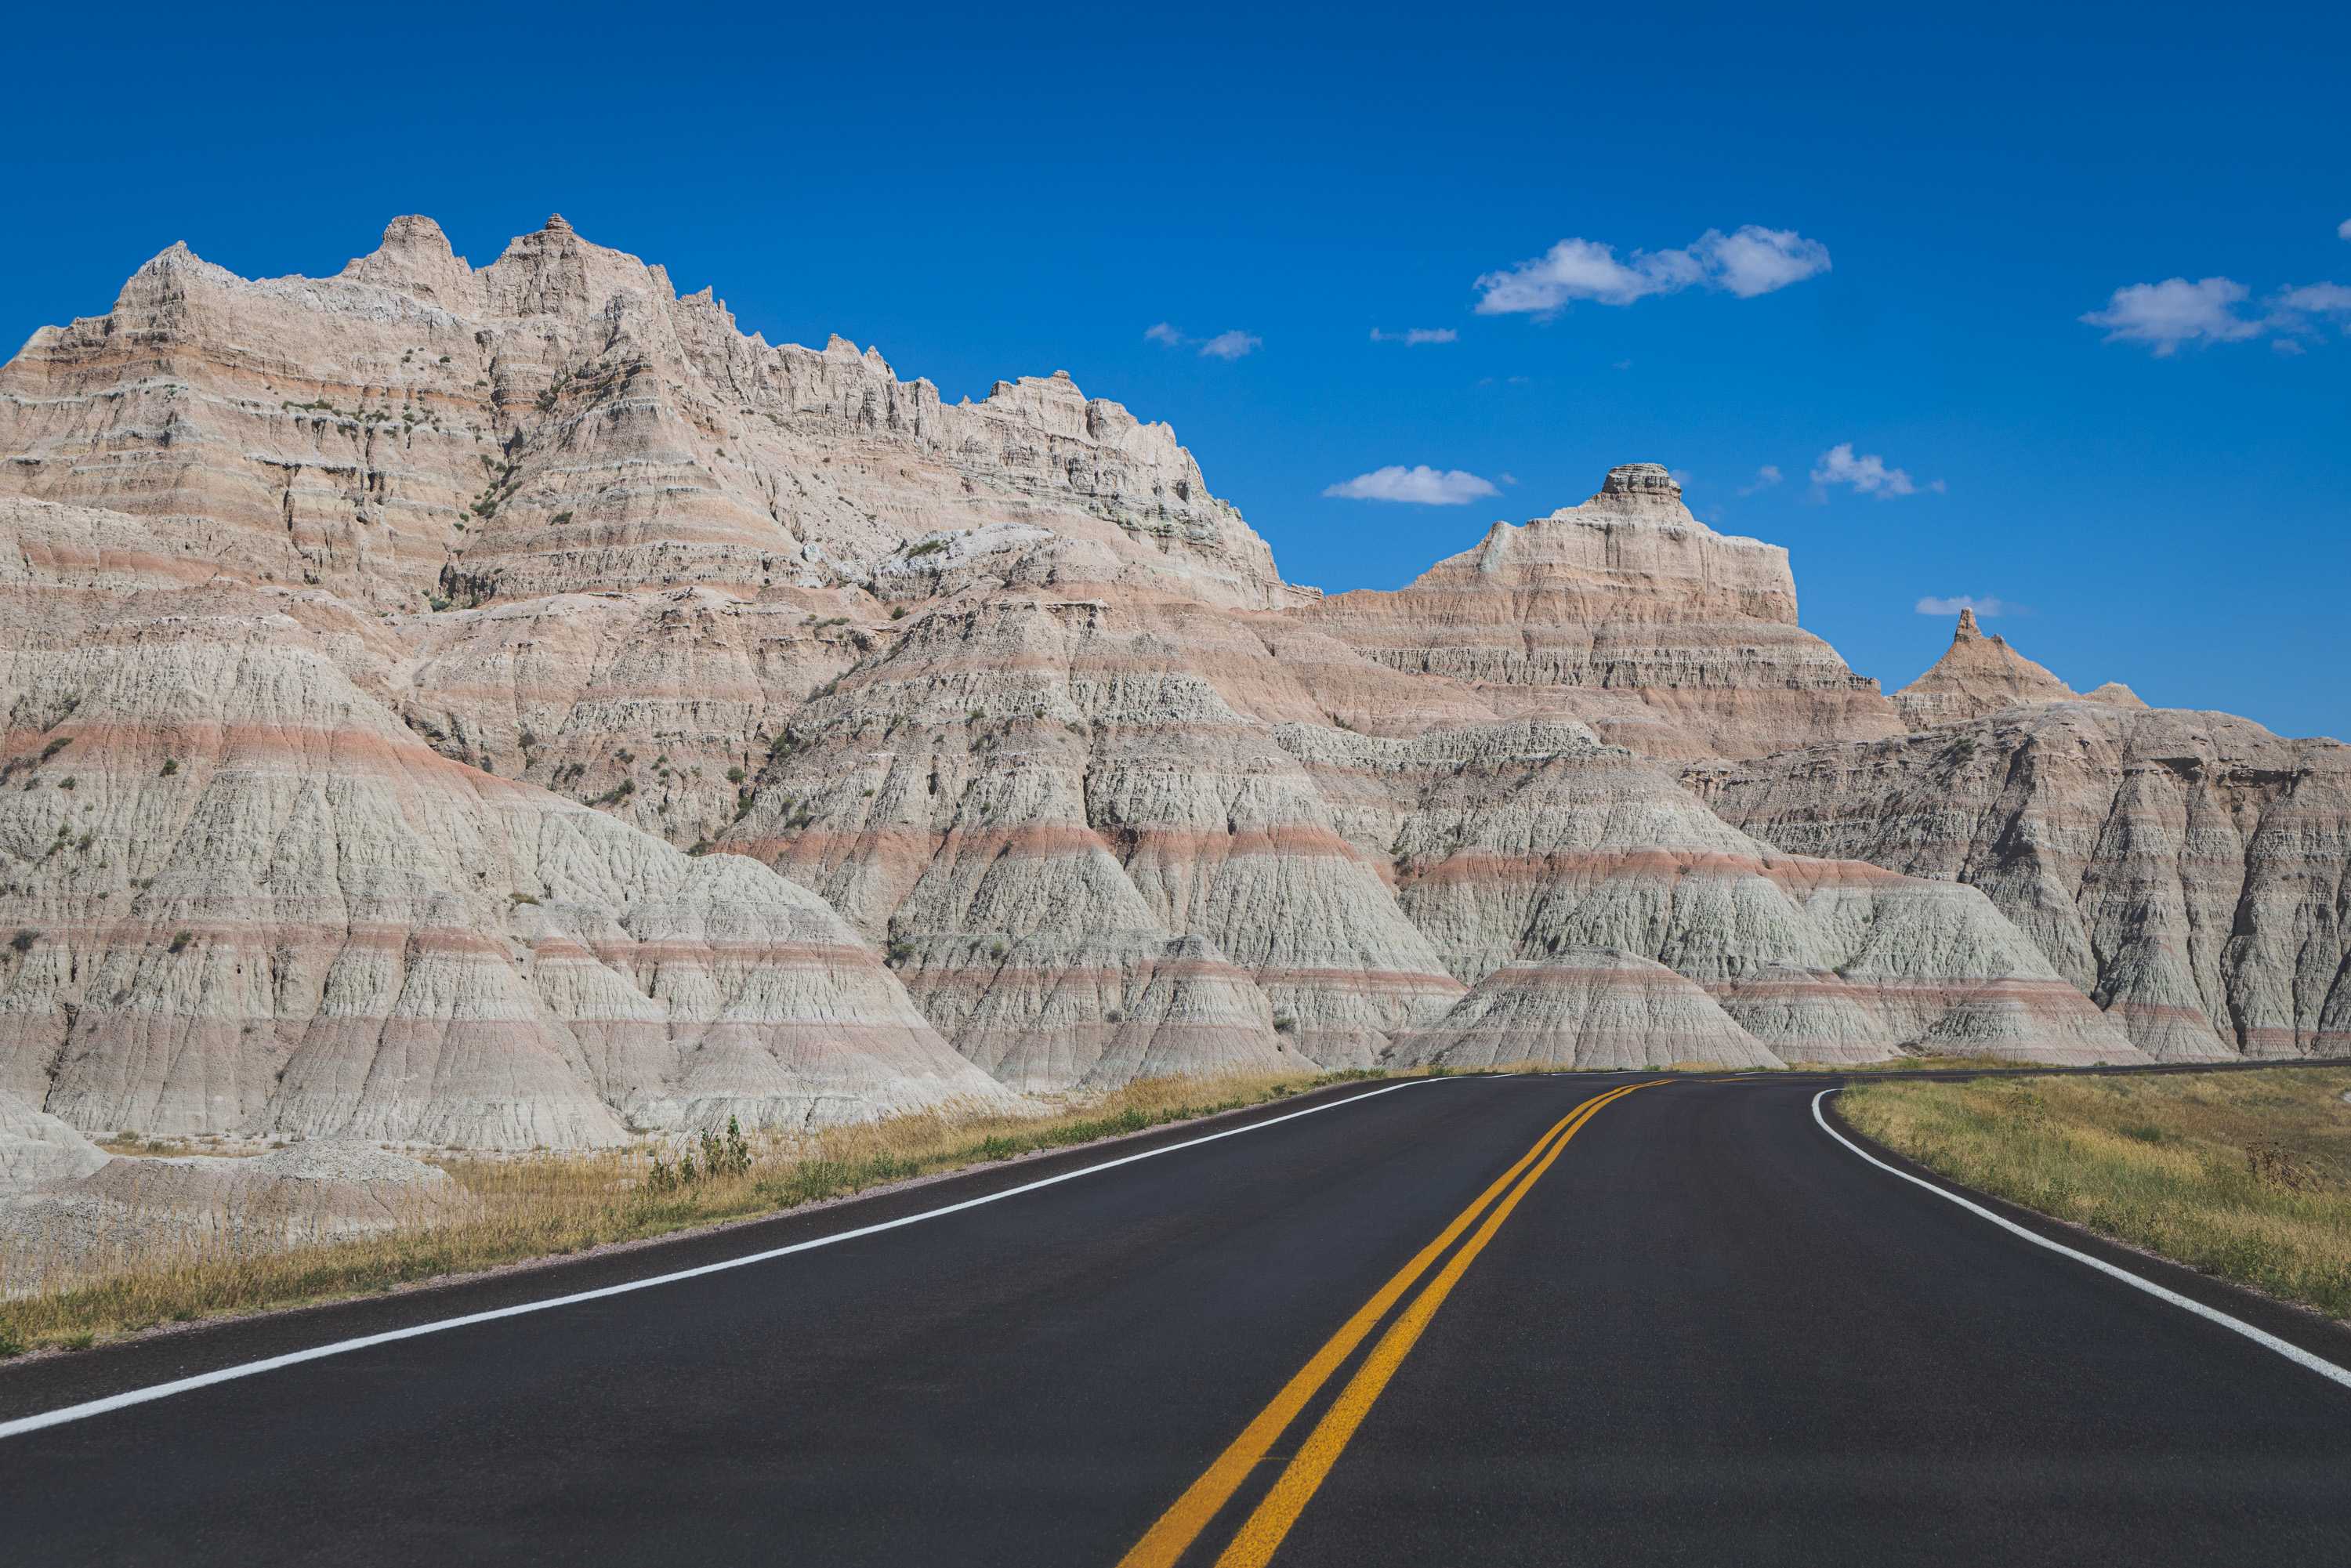 A photo of a jet black road with brightly painted double yellow lines curving around a large rock formation which has clearly visible reddish layers from different ages all underneath a bright blue sky.